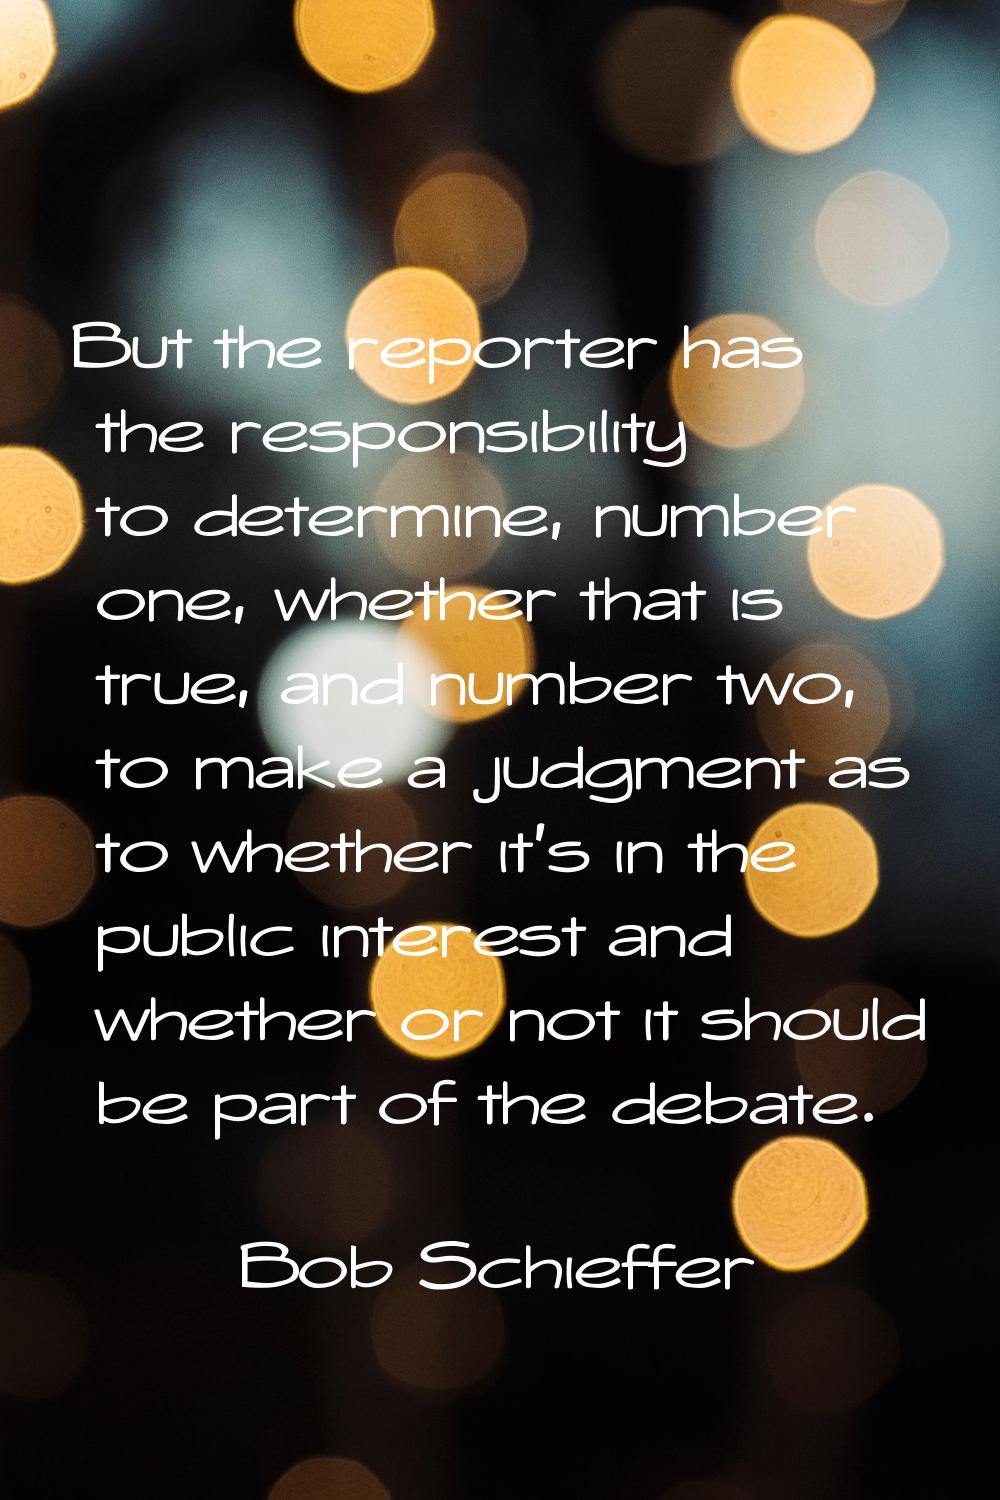 But the reporter has the responsibility to determine, number one, whether that is true, and number 